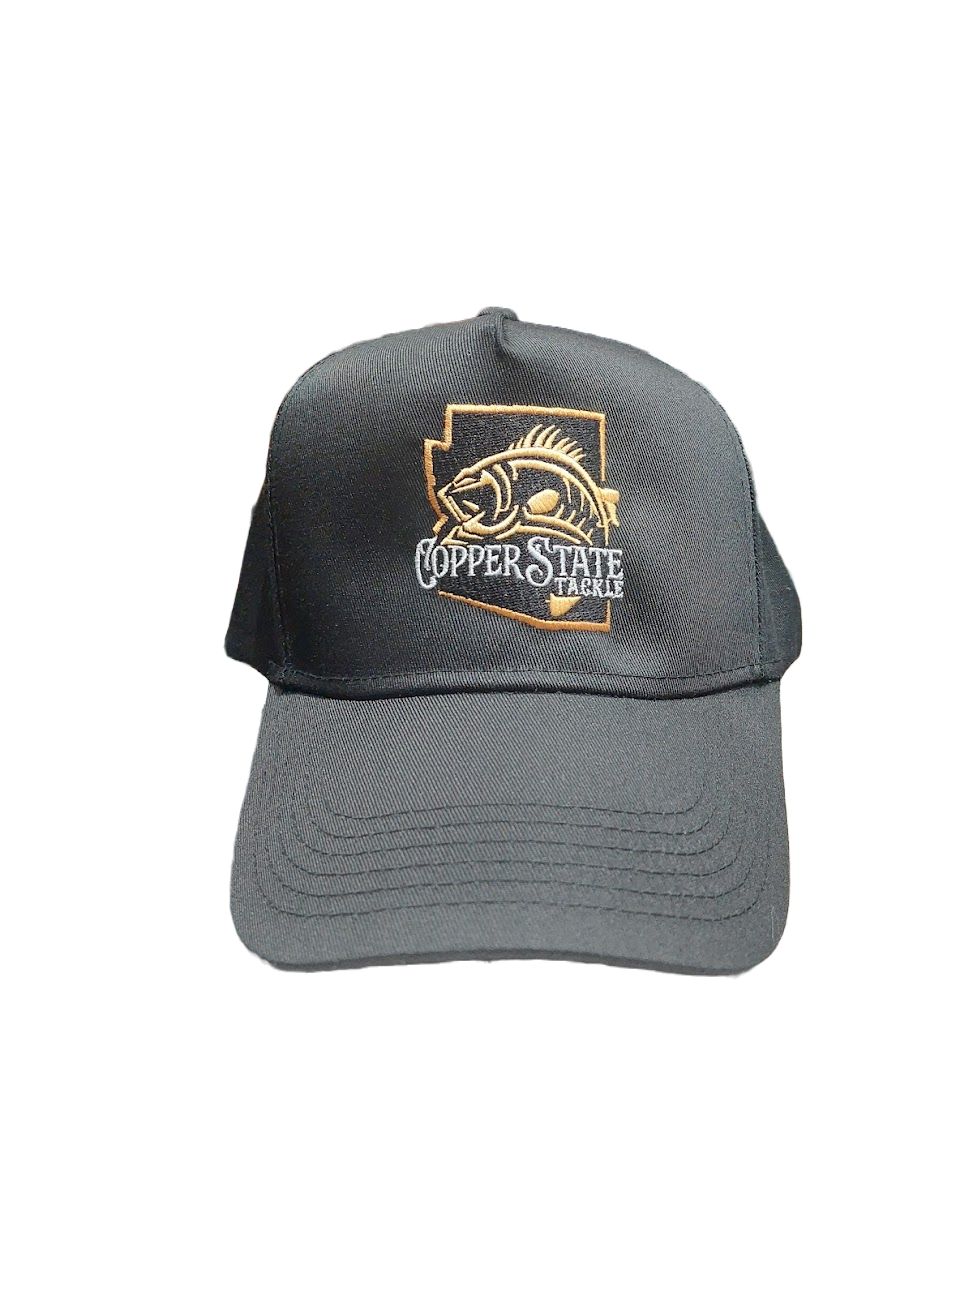 COPPERSTATE TACKLE HATS